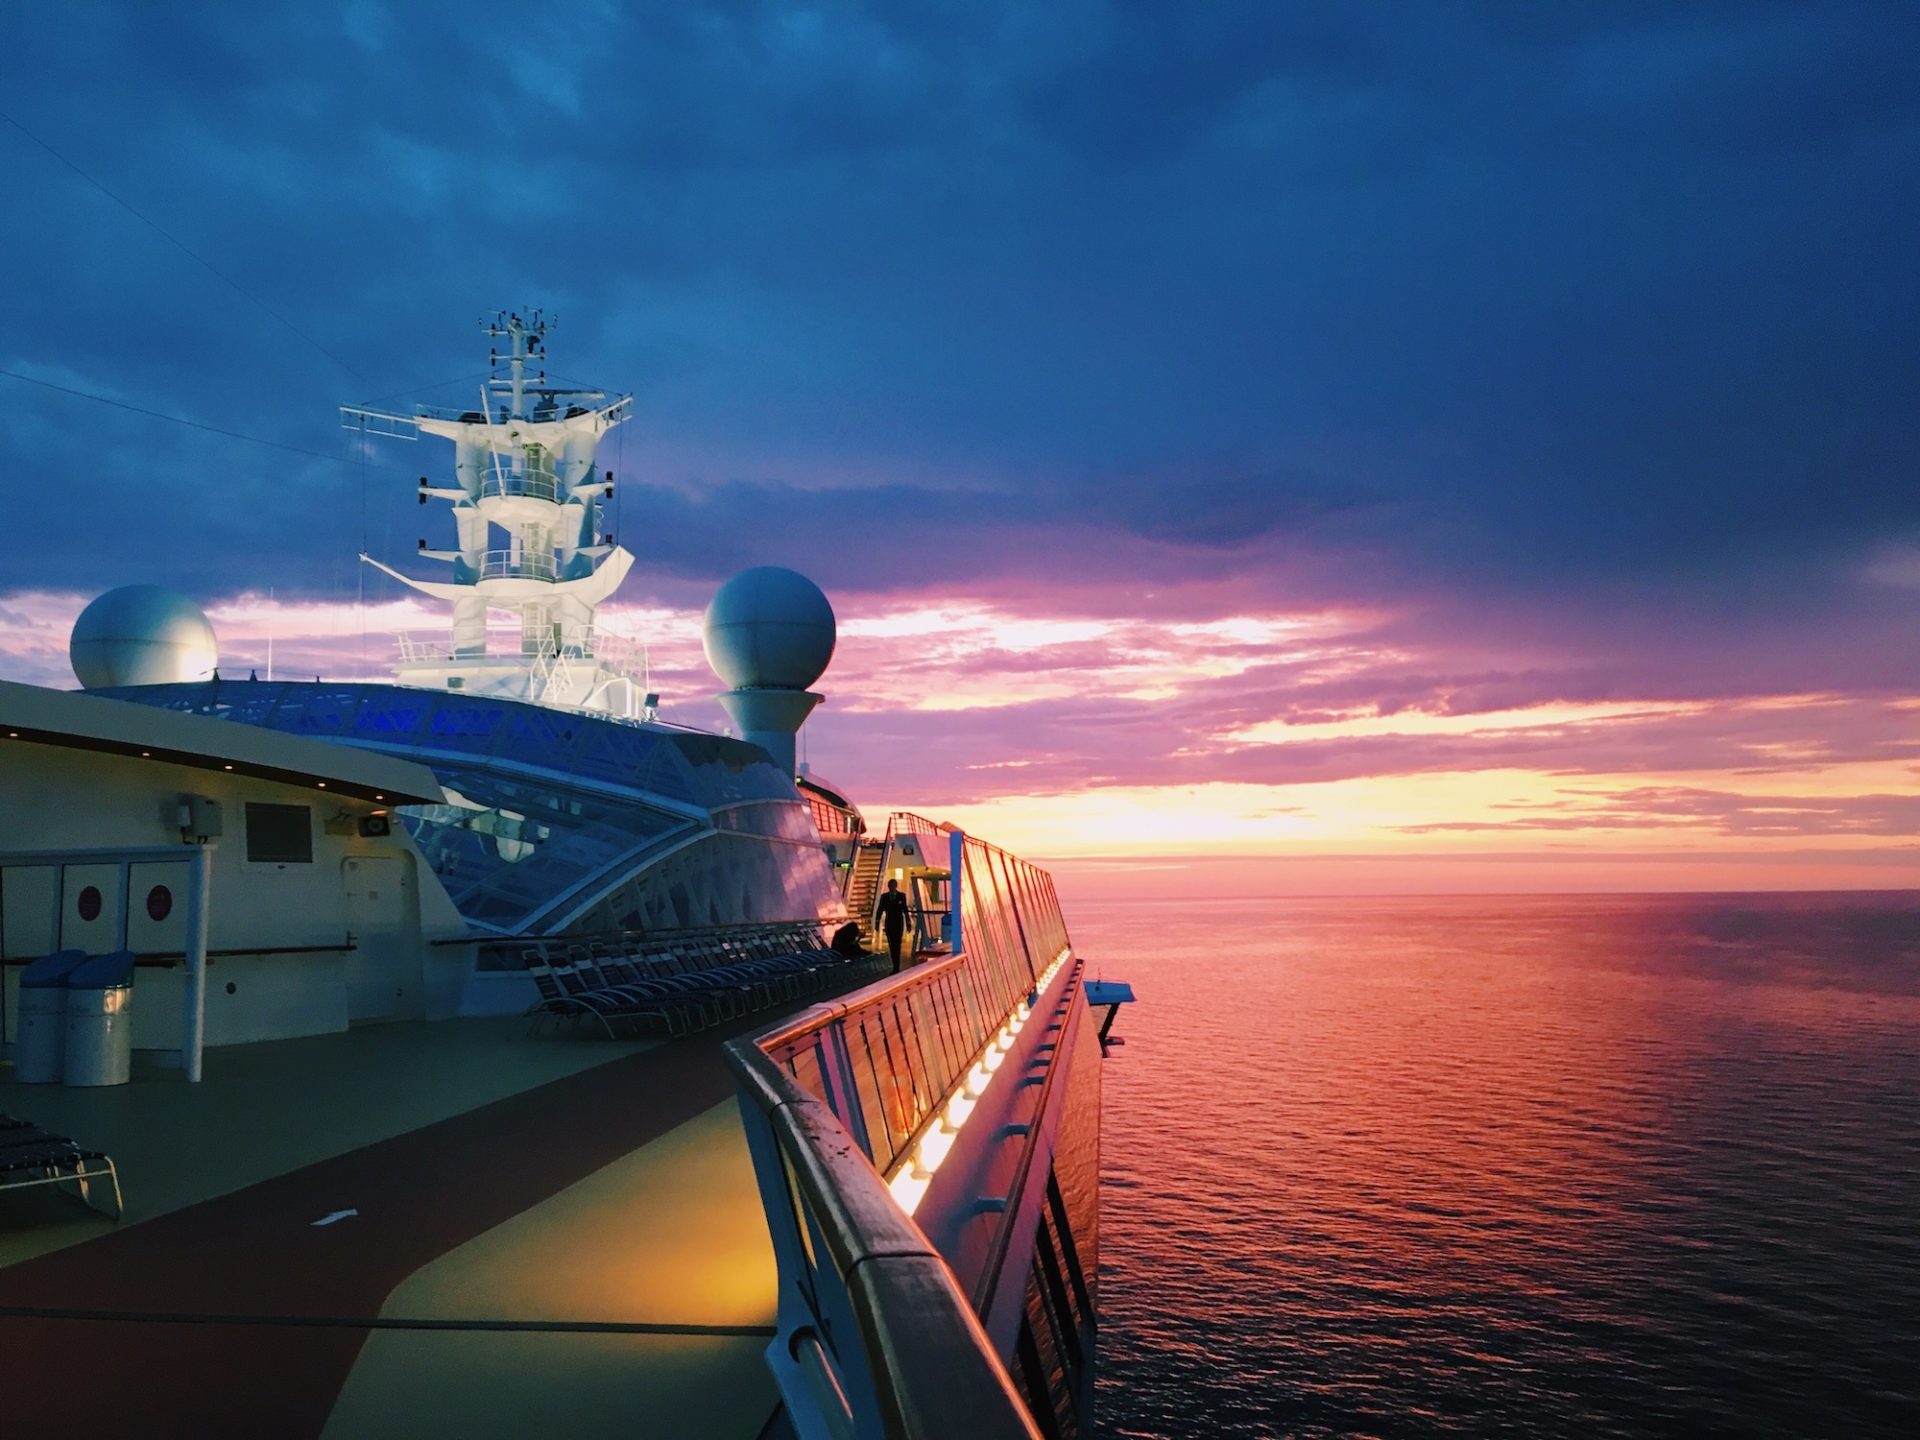 open top deck of cruise ship at sea during pink and purple sunset